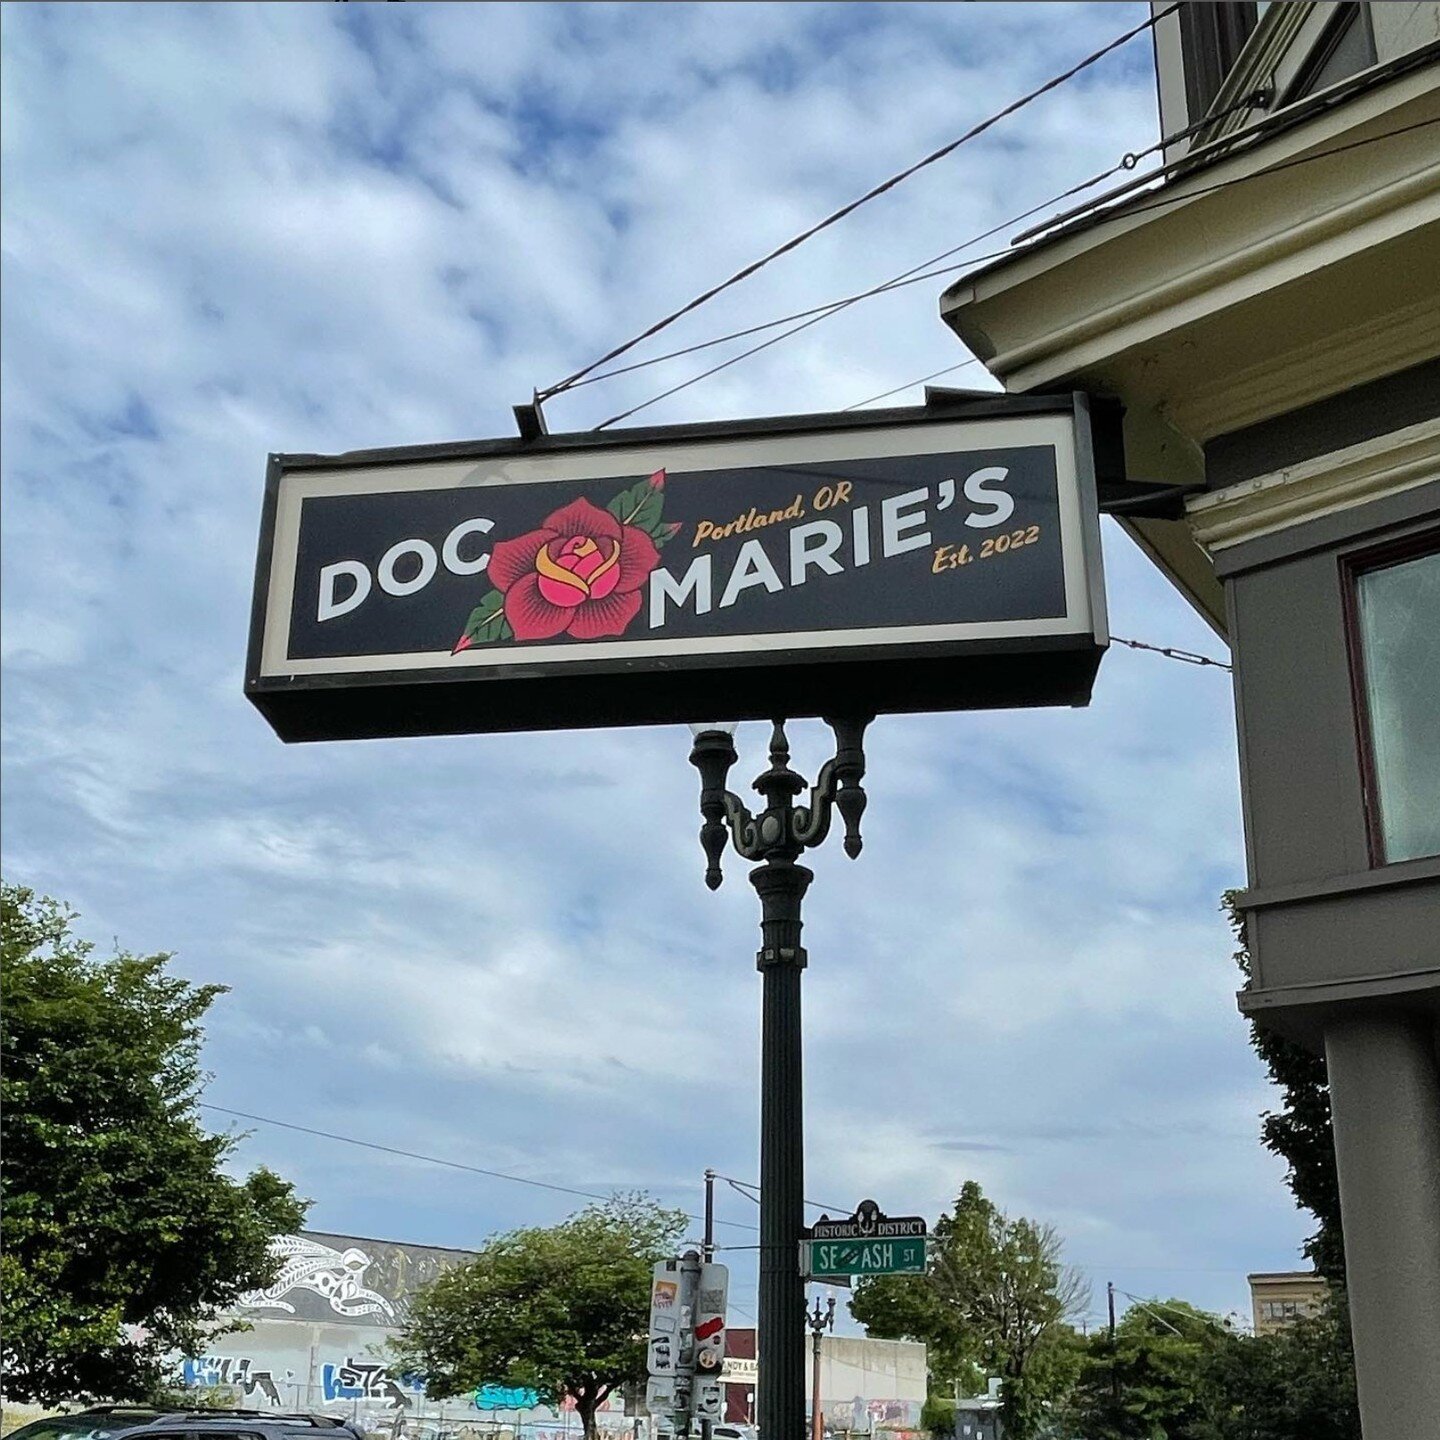 I'm so excited to tell you all about this project that I have been SO PROUD AND HONORED to be a part of: Doc Marie's, Portland's first and only lesbian bar (by their own description, &quot;A lesbian bar for everyone&quot;), opening July 1 at SE Grand